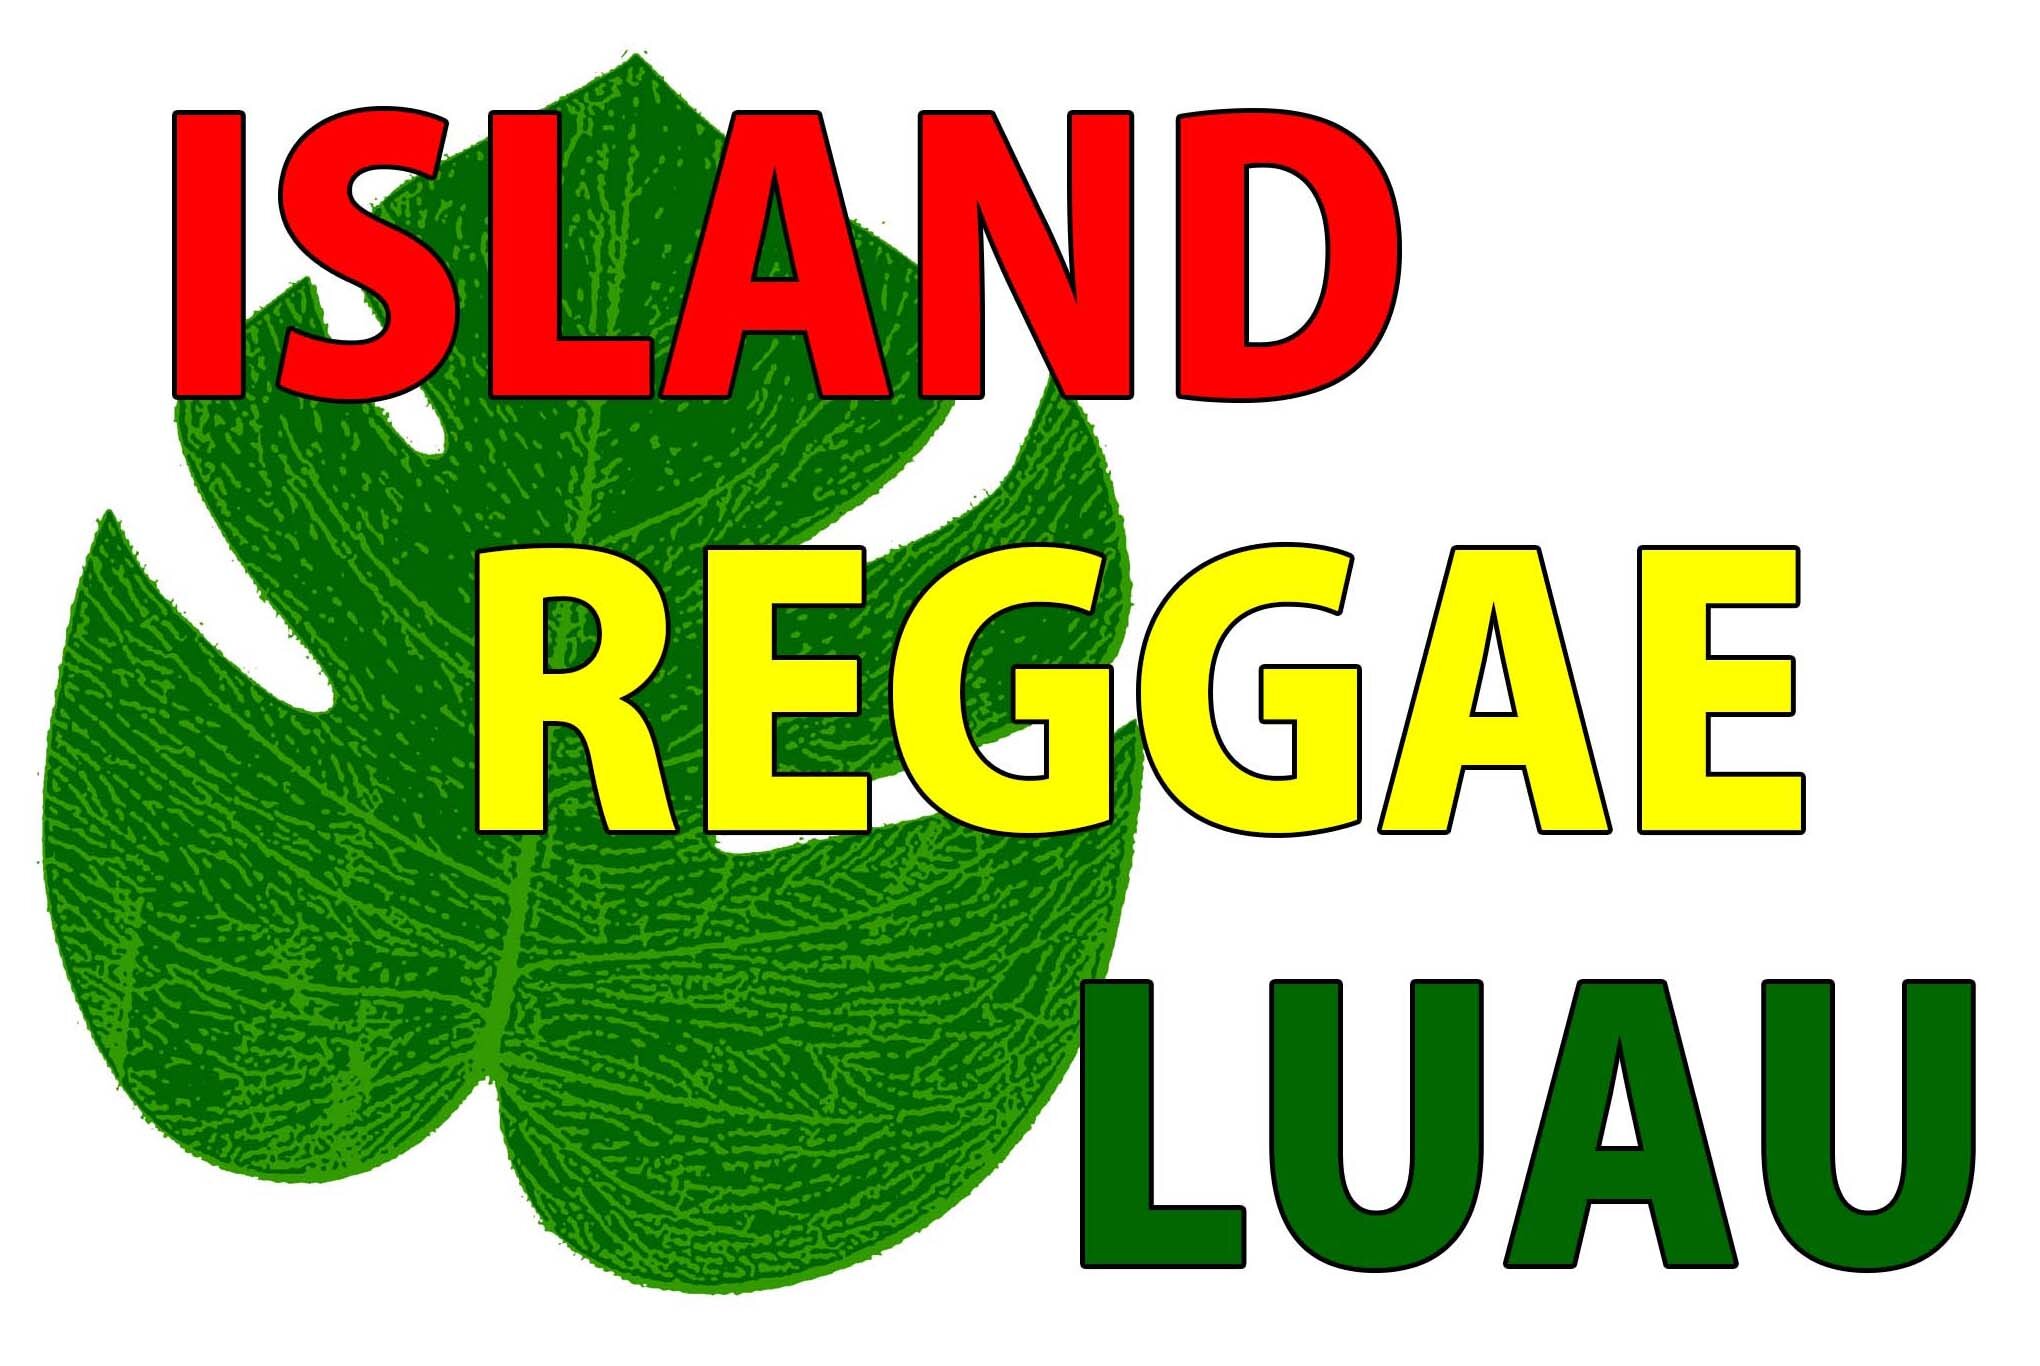 Listen to the latest Island Jams from Hawaii.